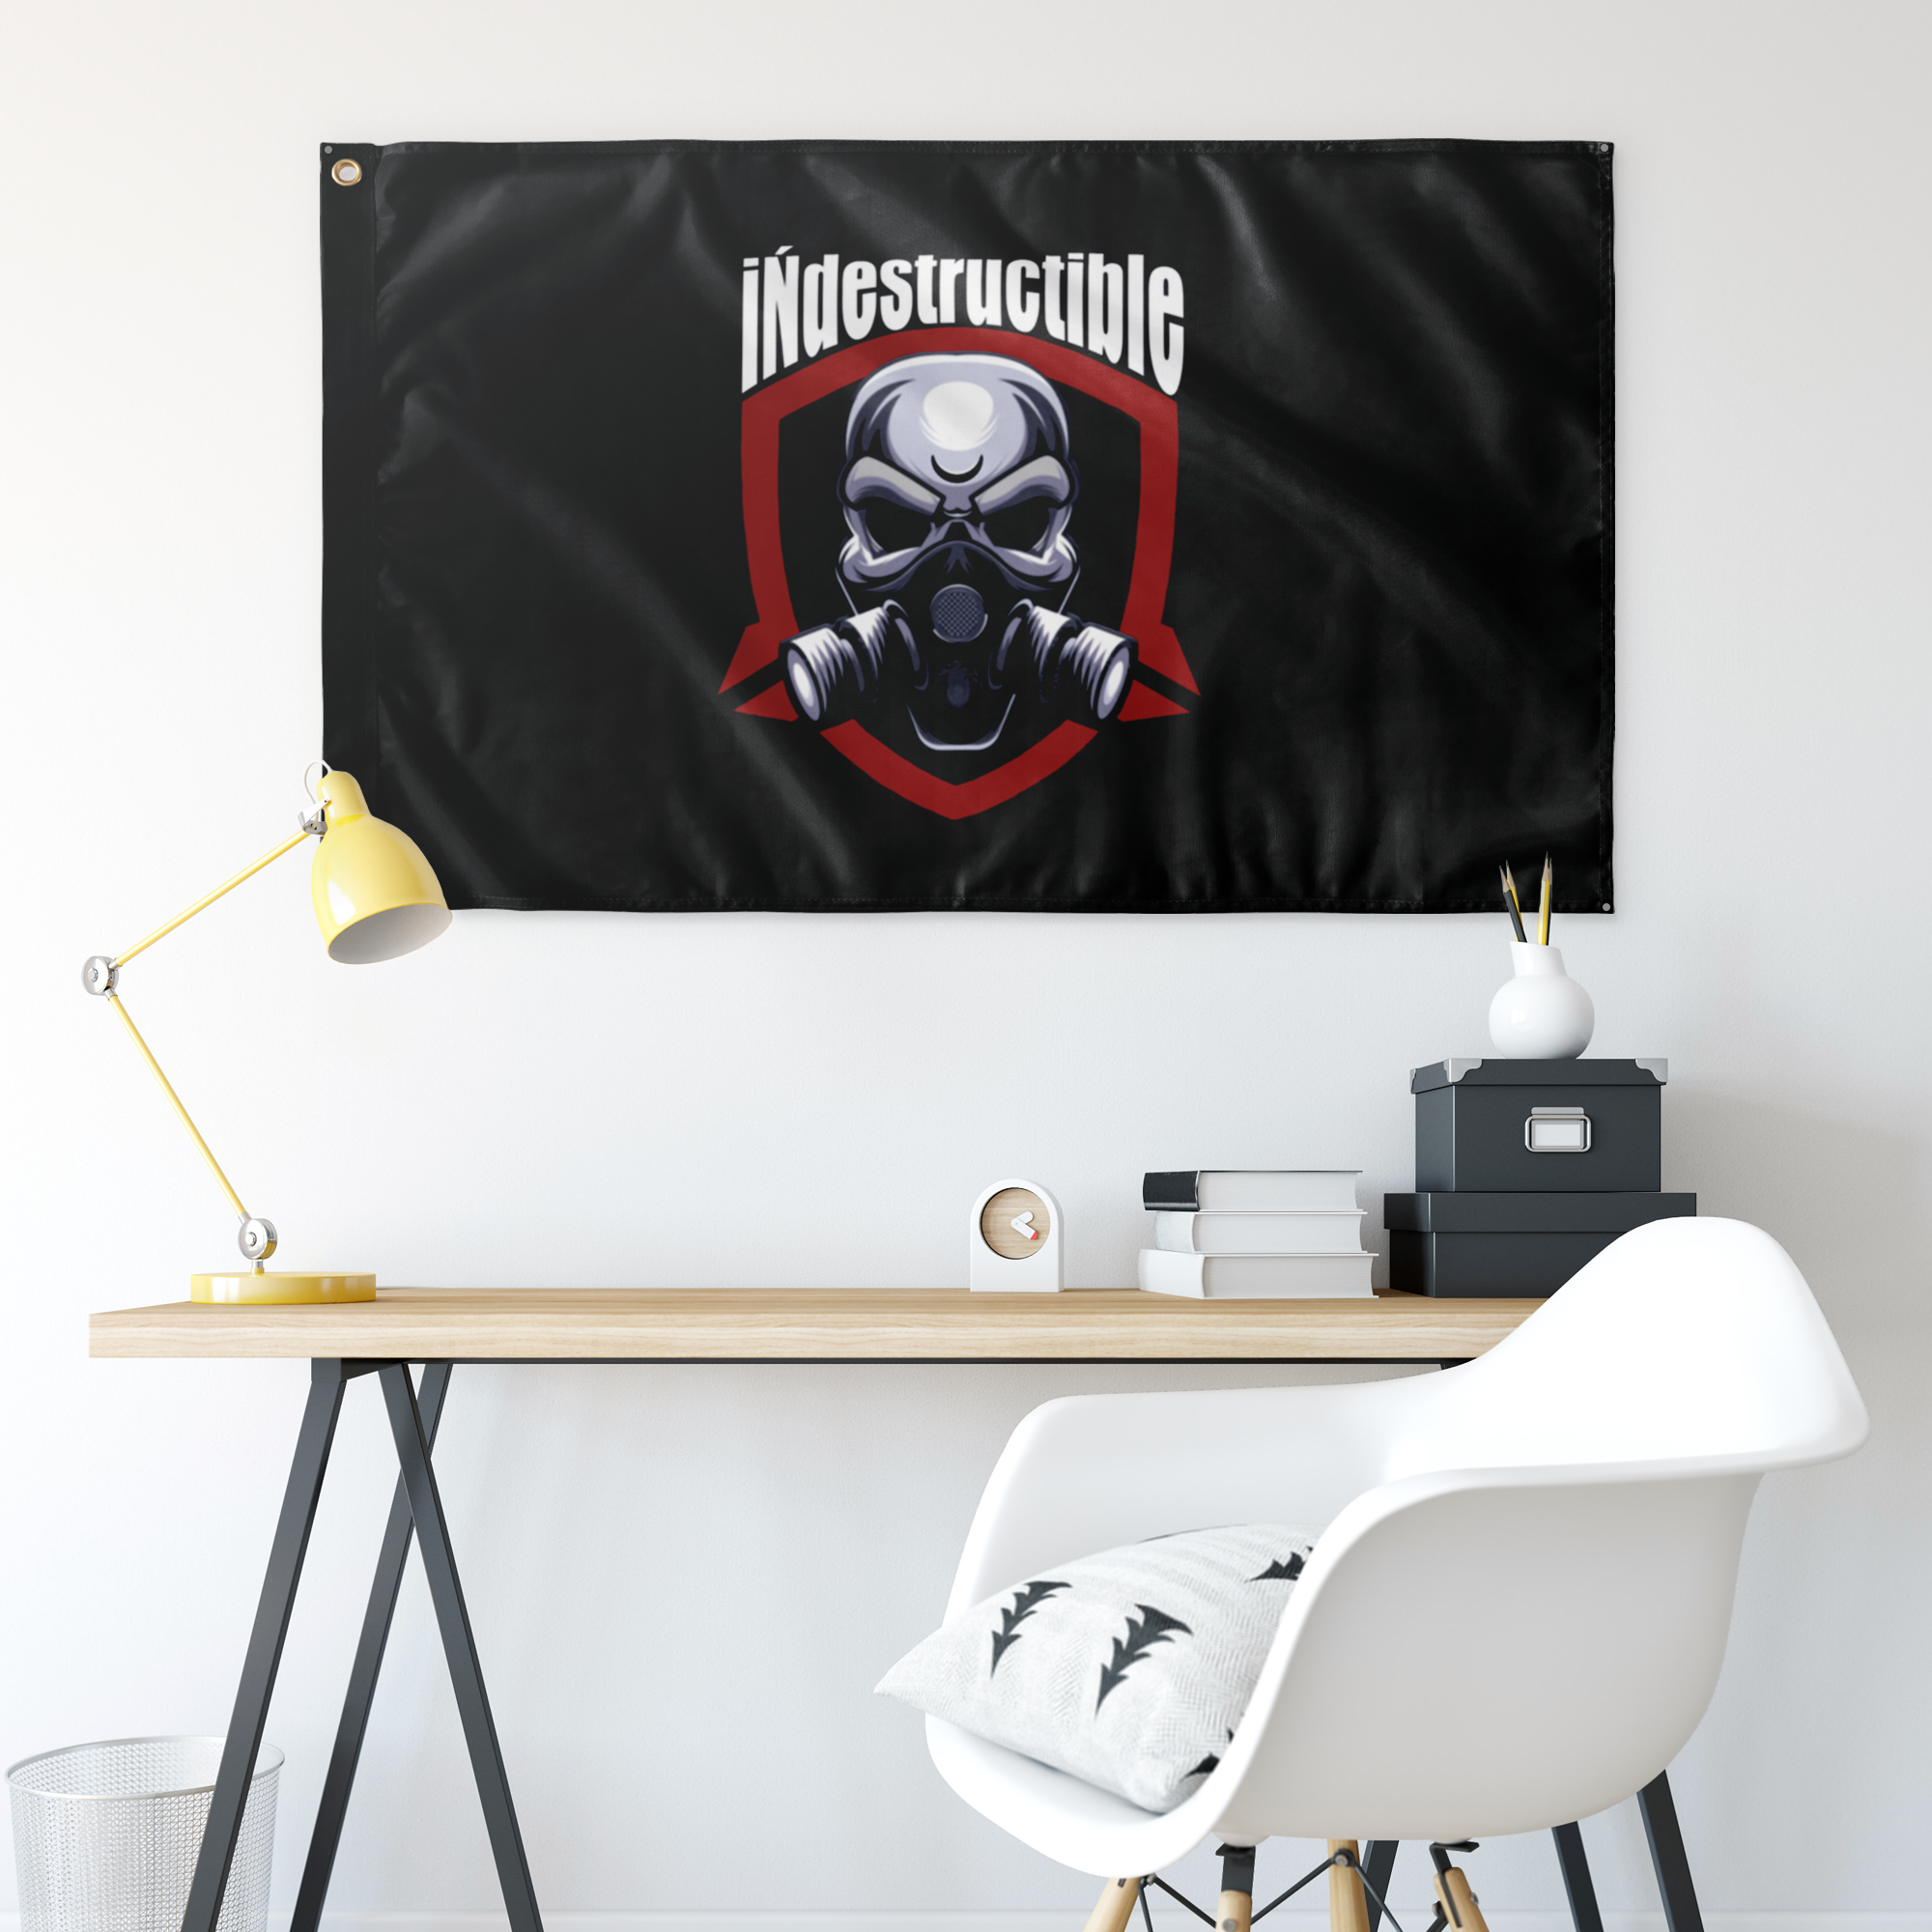 t-ind WALL FLAG HORIZONTAL